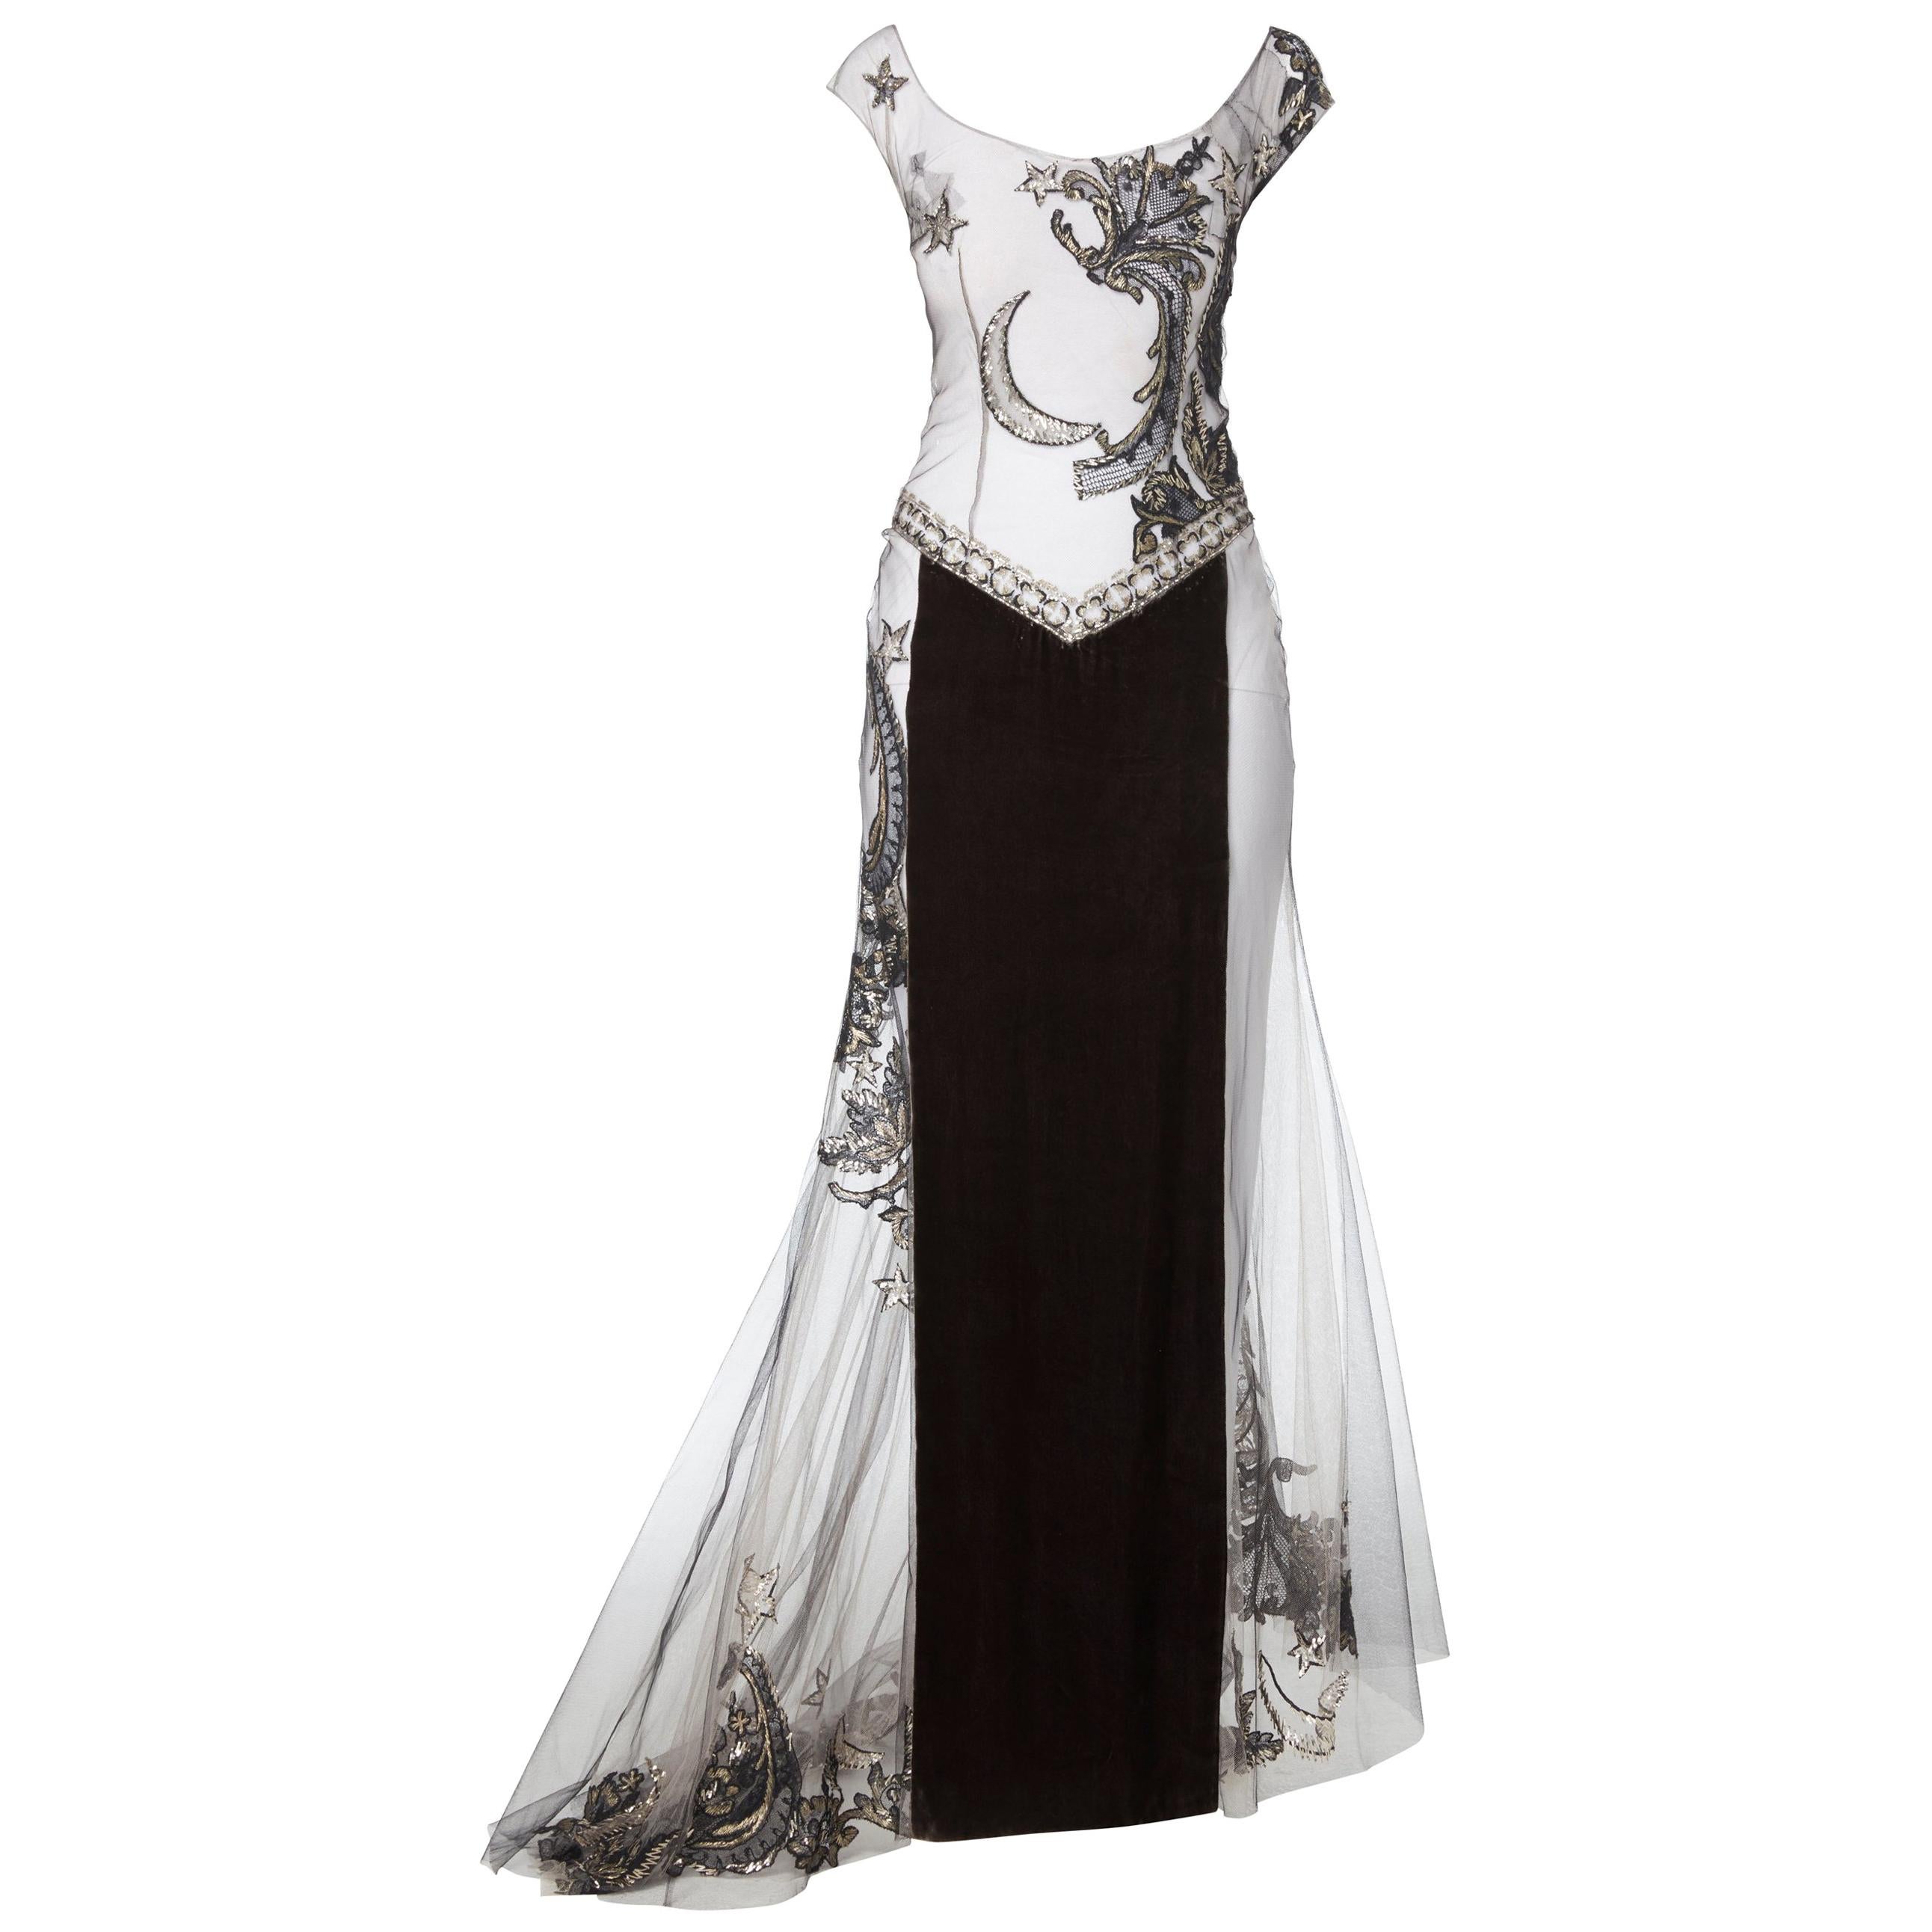 Gianfranco Ferre haute couture gown, Spring/Summer 1998 For Sale